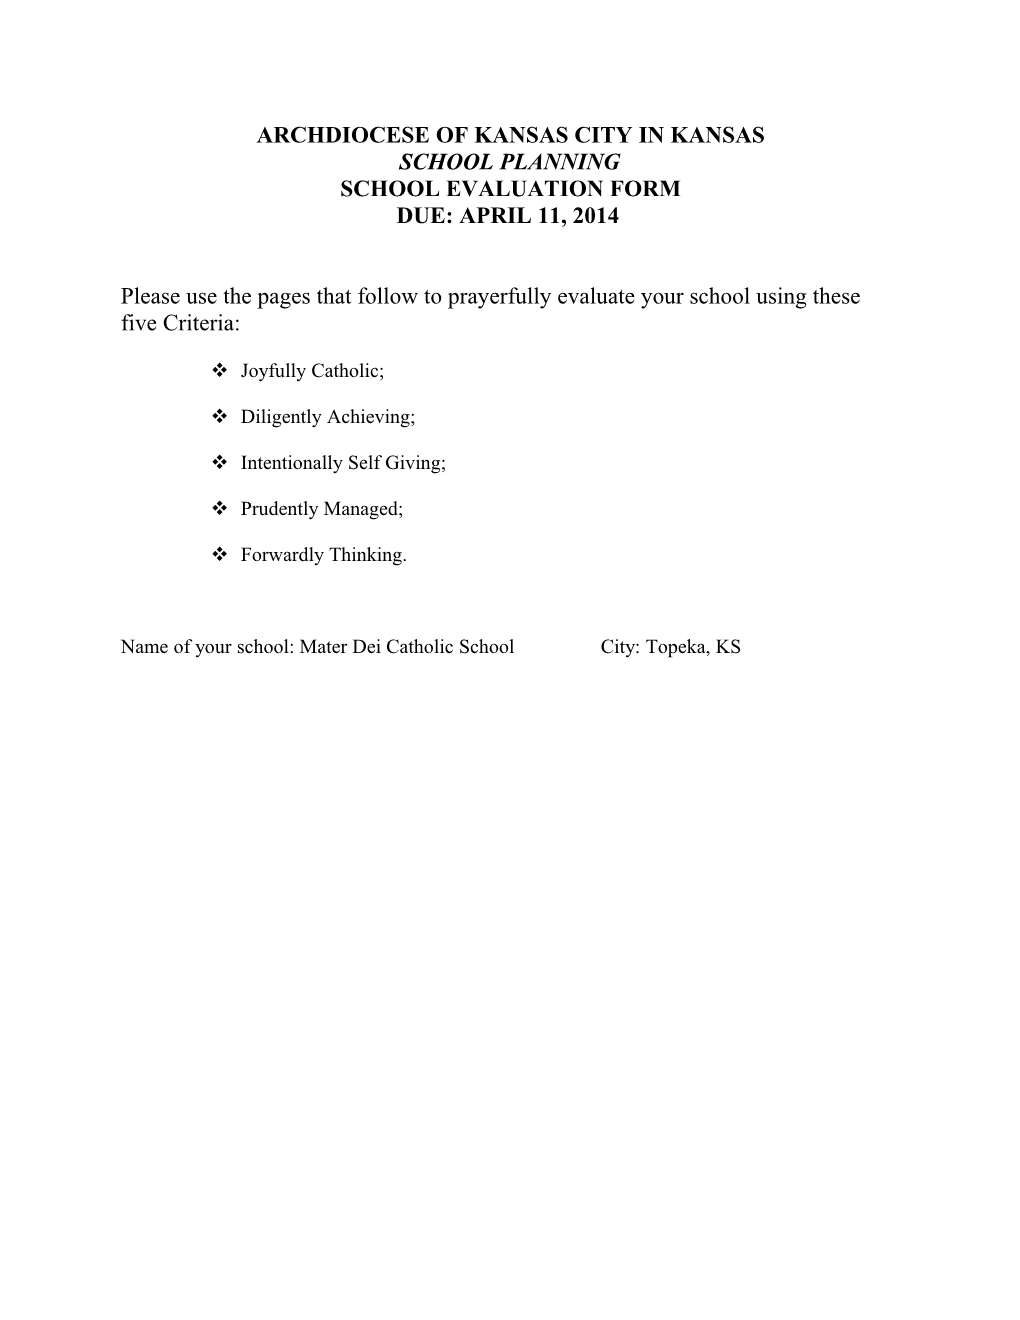 Archdiocese of Kansas City in Kansas School Evaluation Form